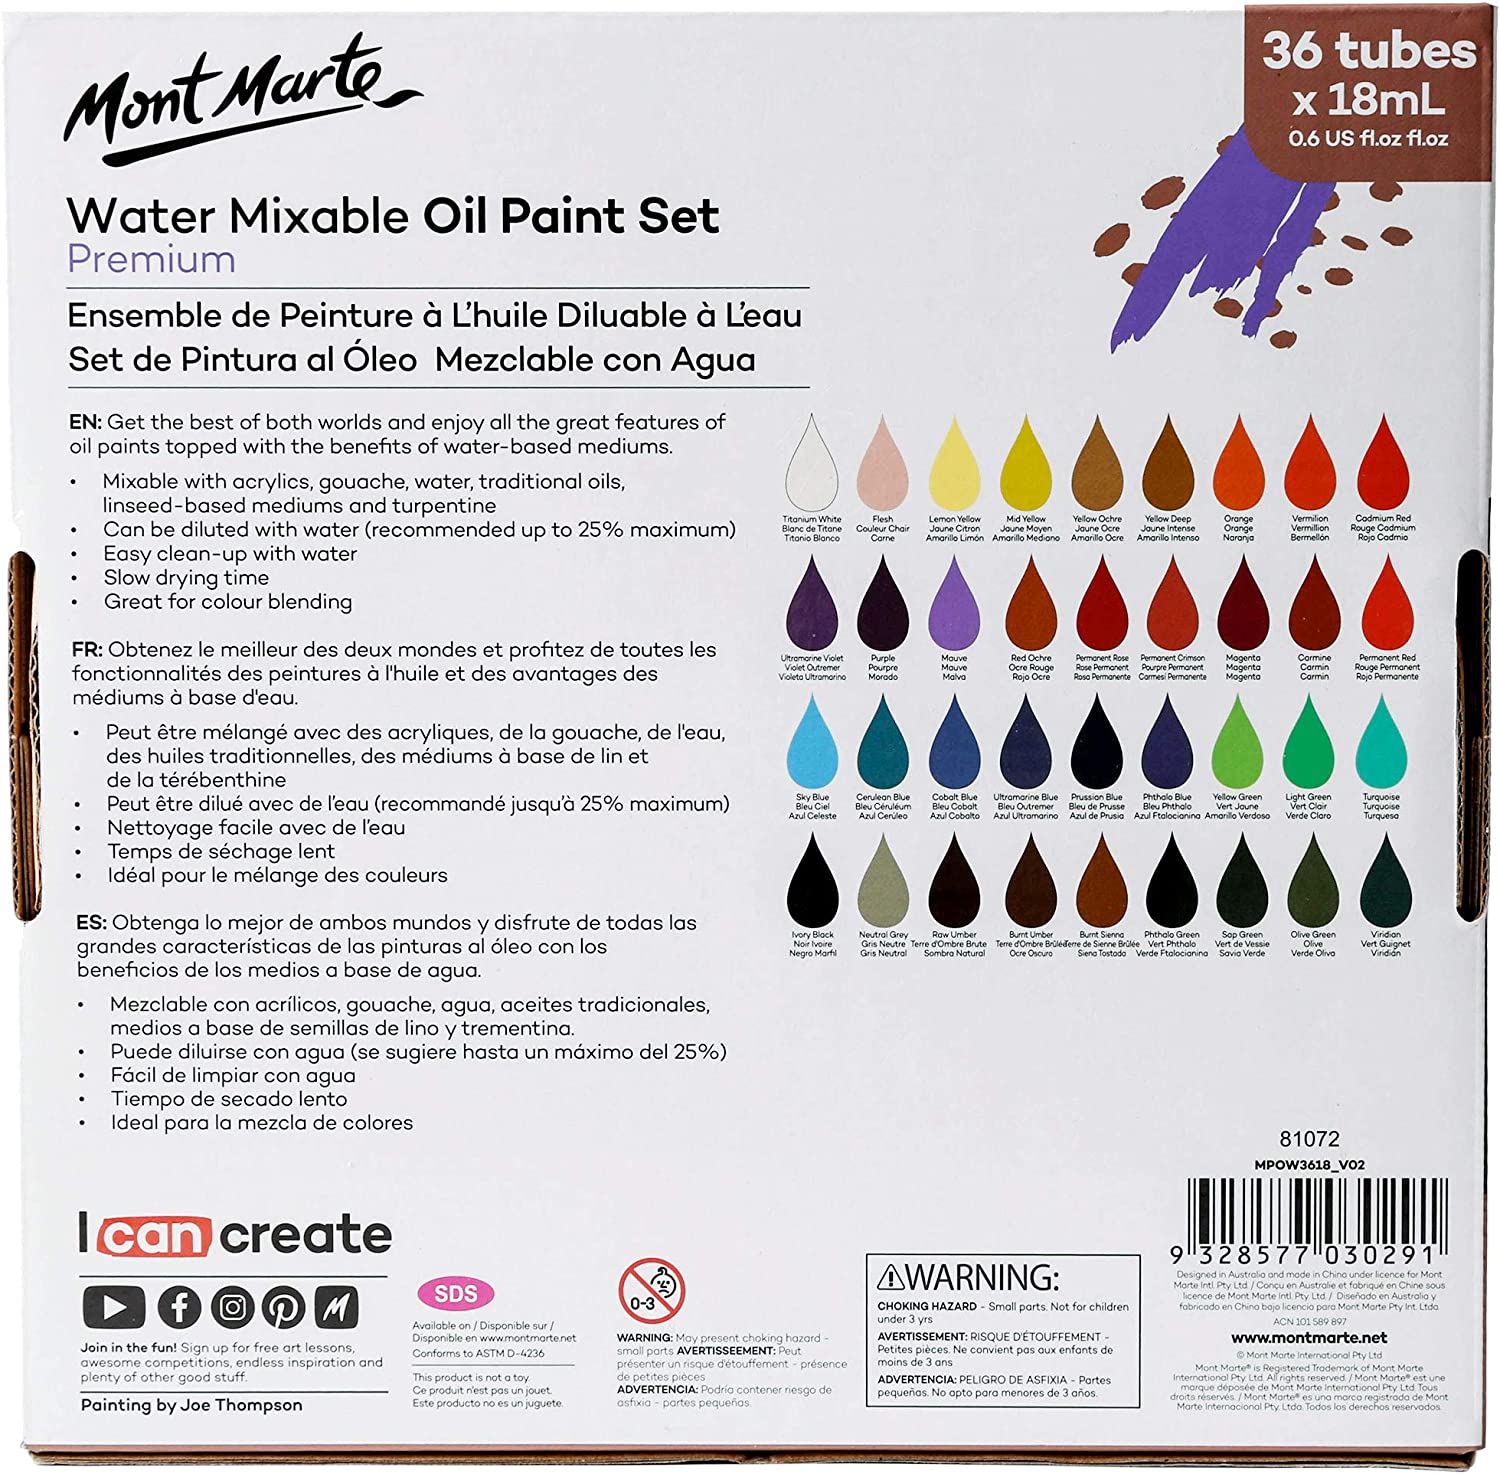 Mont Marte H2O Water Mixable Oil Paint Set shades